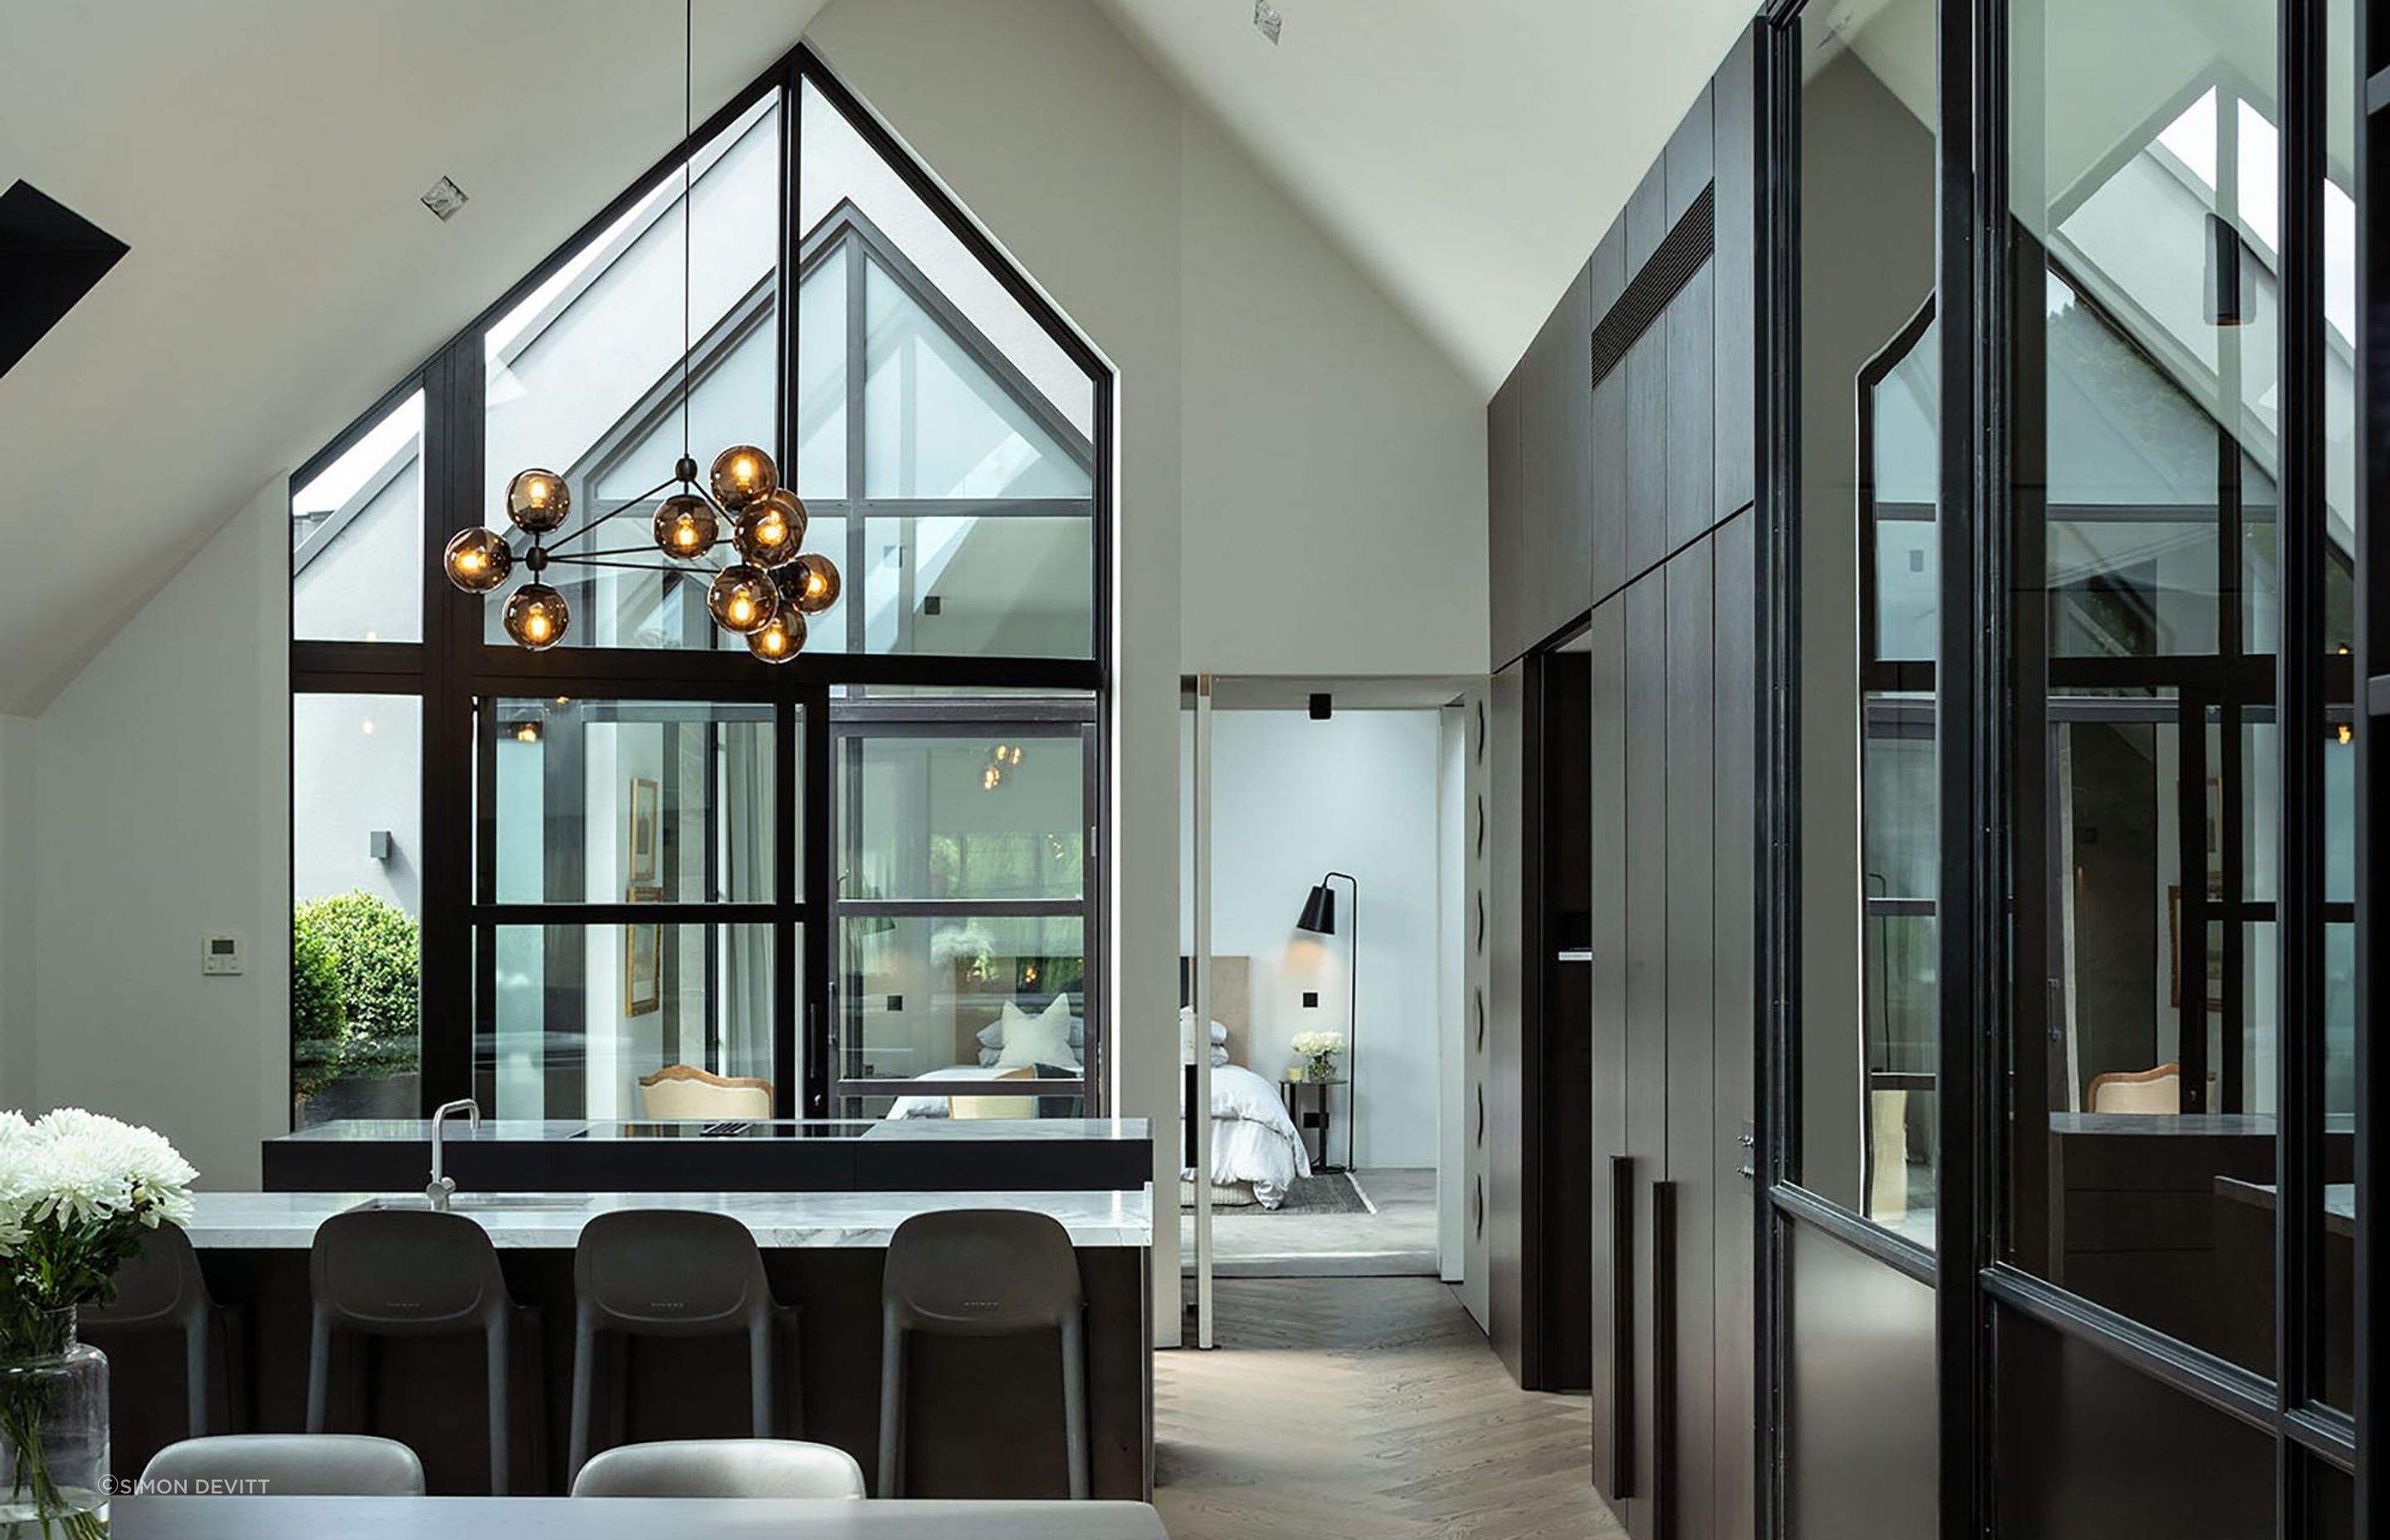 The  minimalist kitchen is a celebration of smooth and textural surfaces that play with the light drawn in from two sides and above.the double-height gabled window.